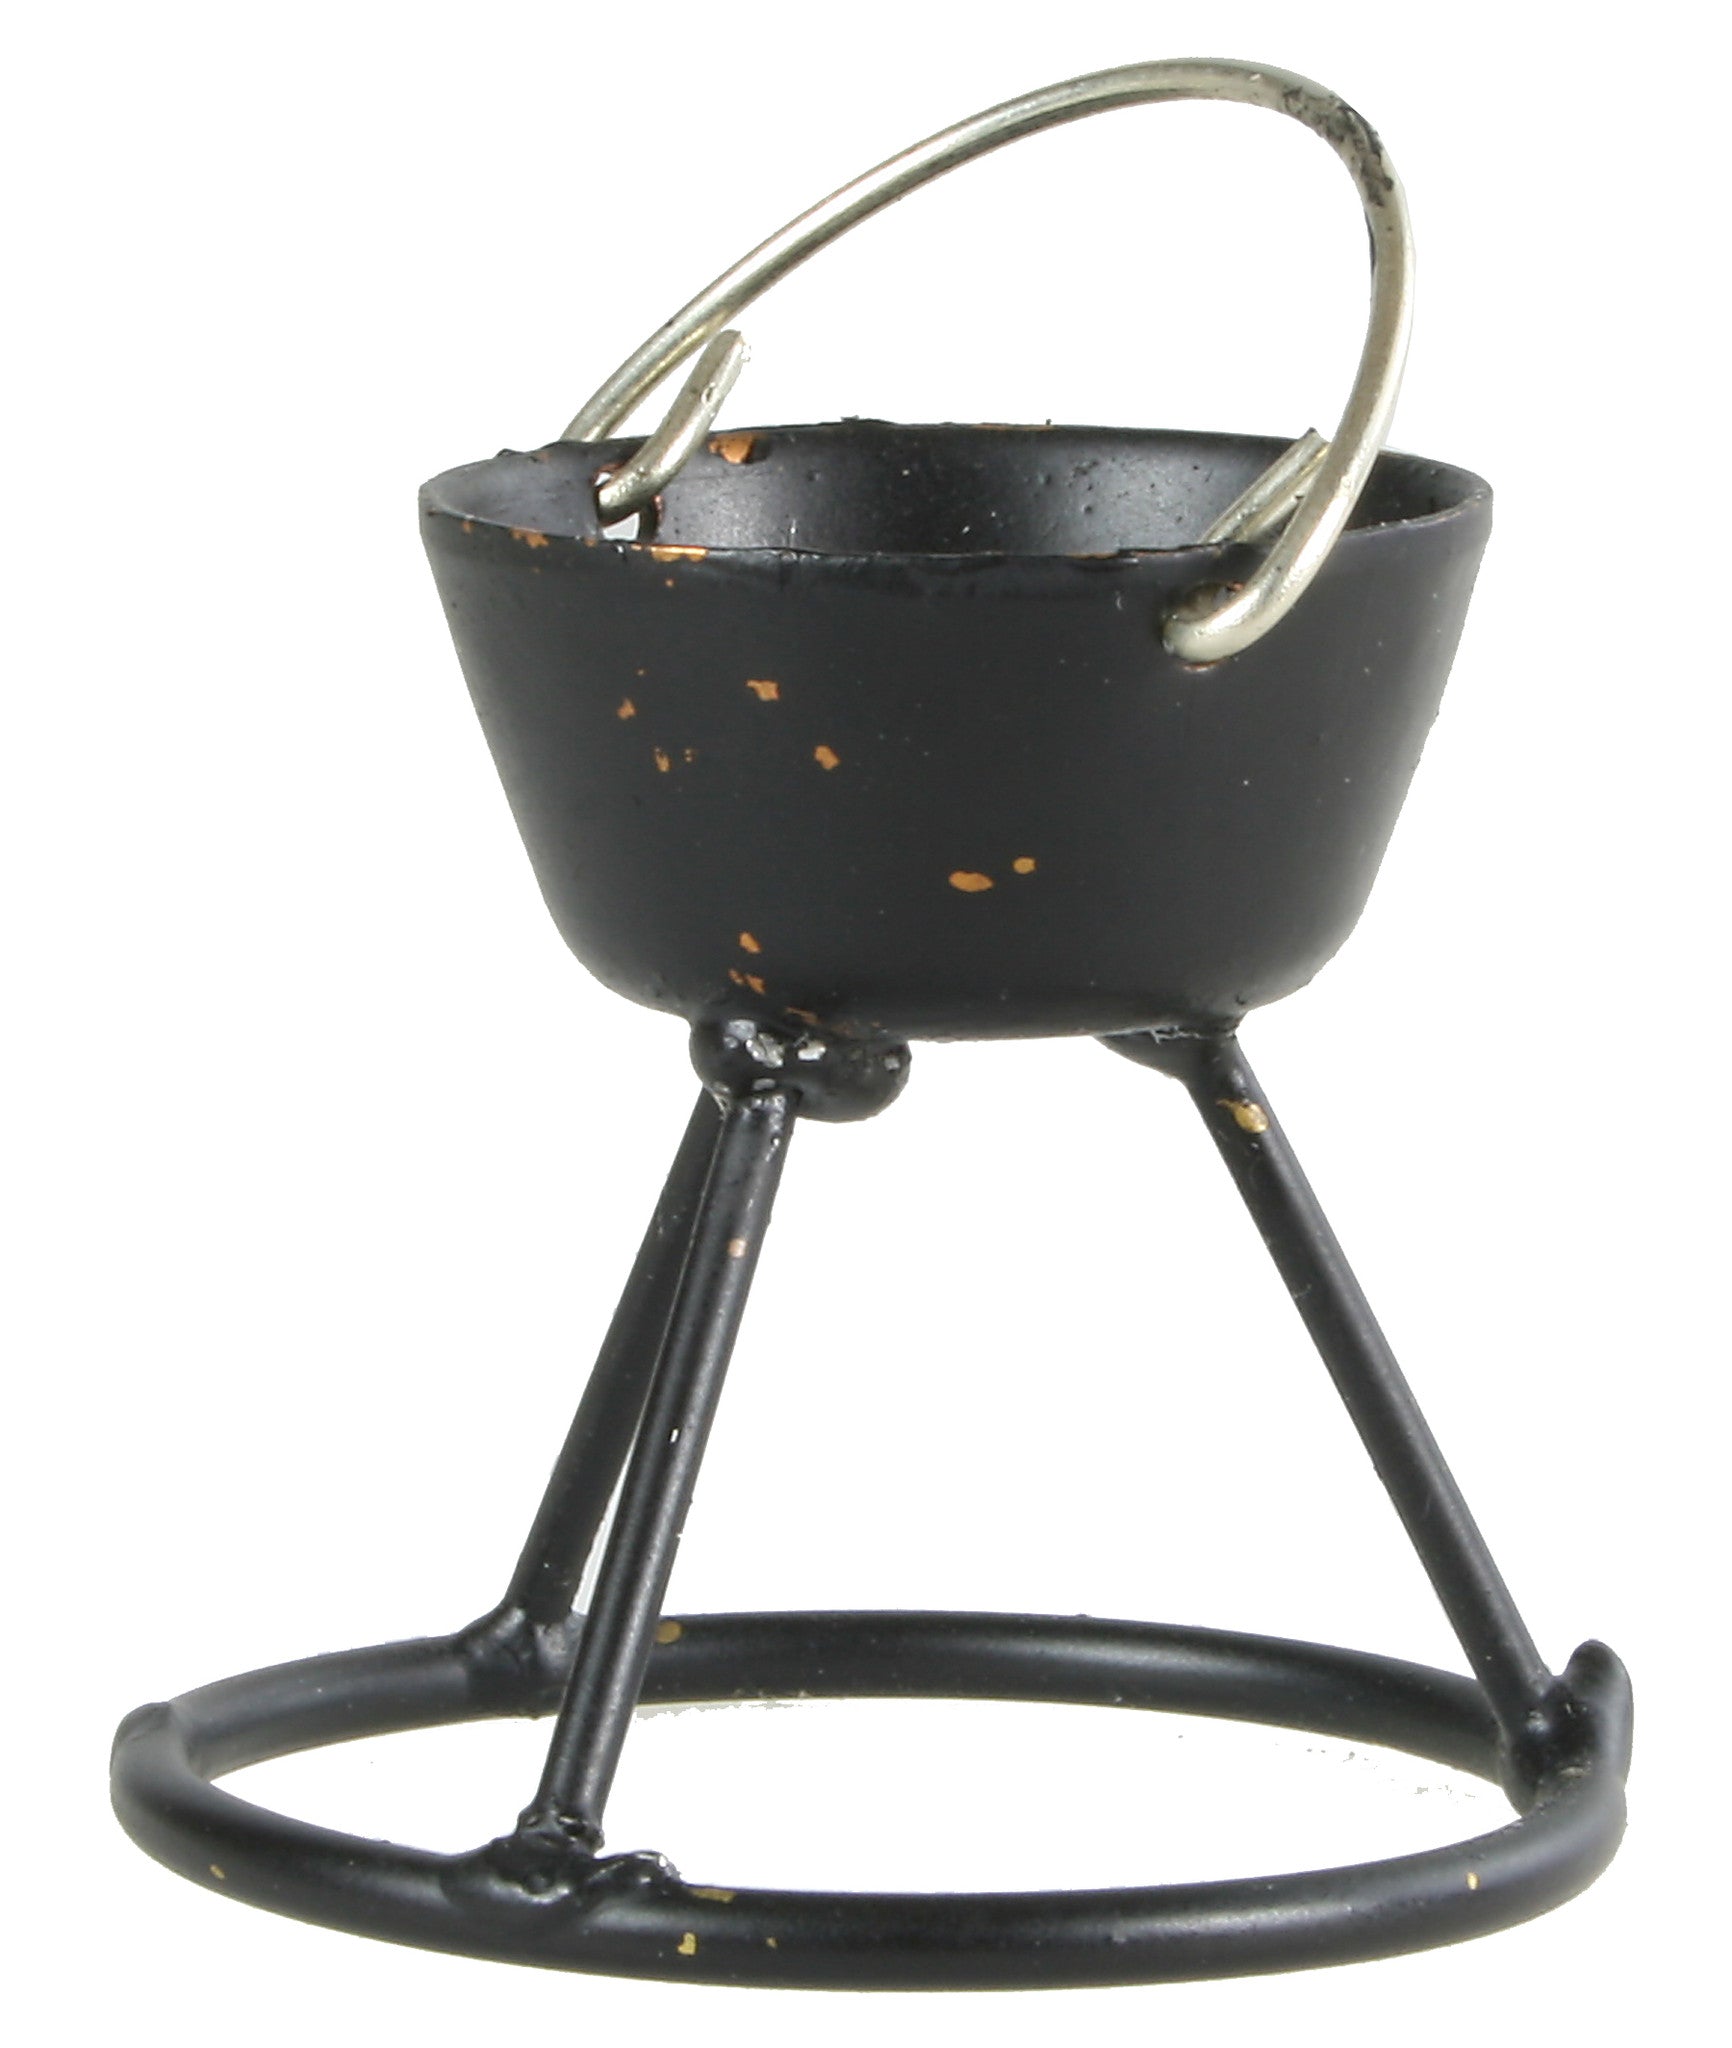 Open Fire Cooking Pot on stand - 1-1/2" tall